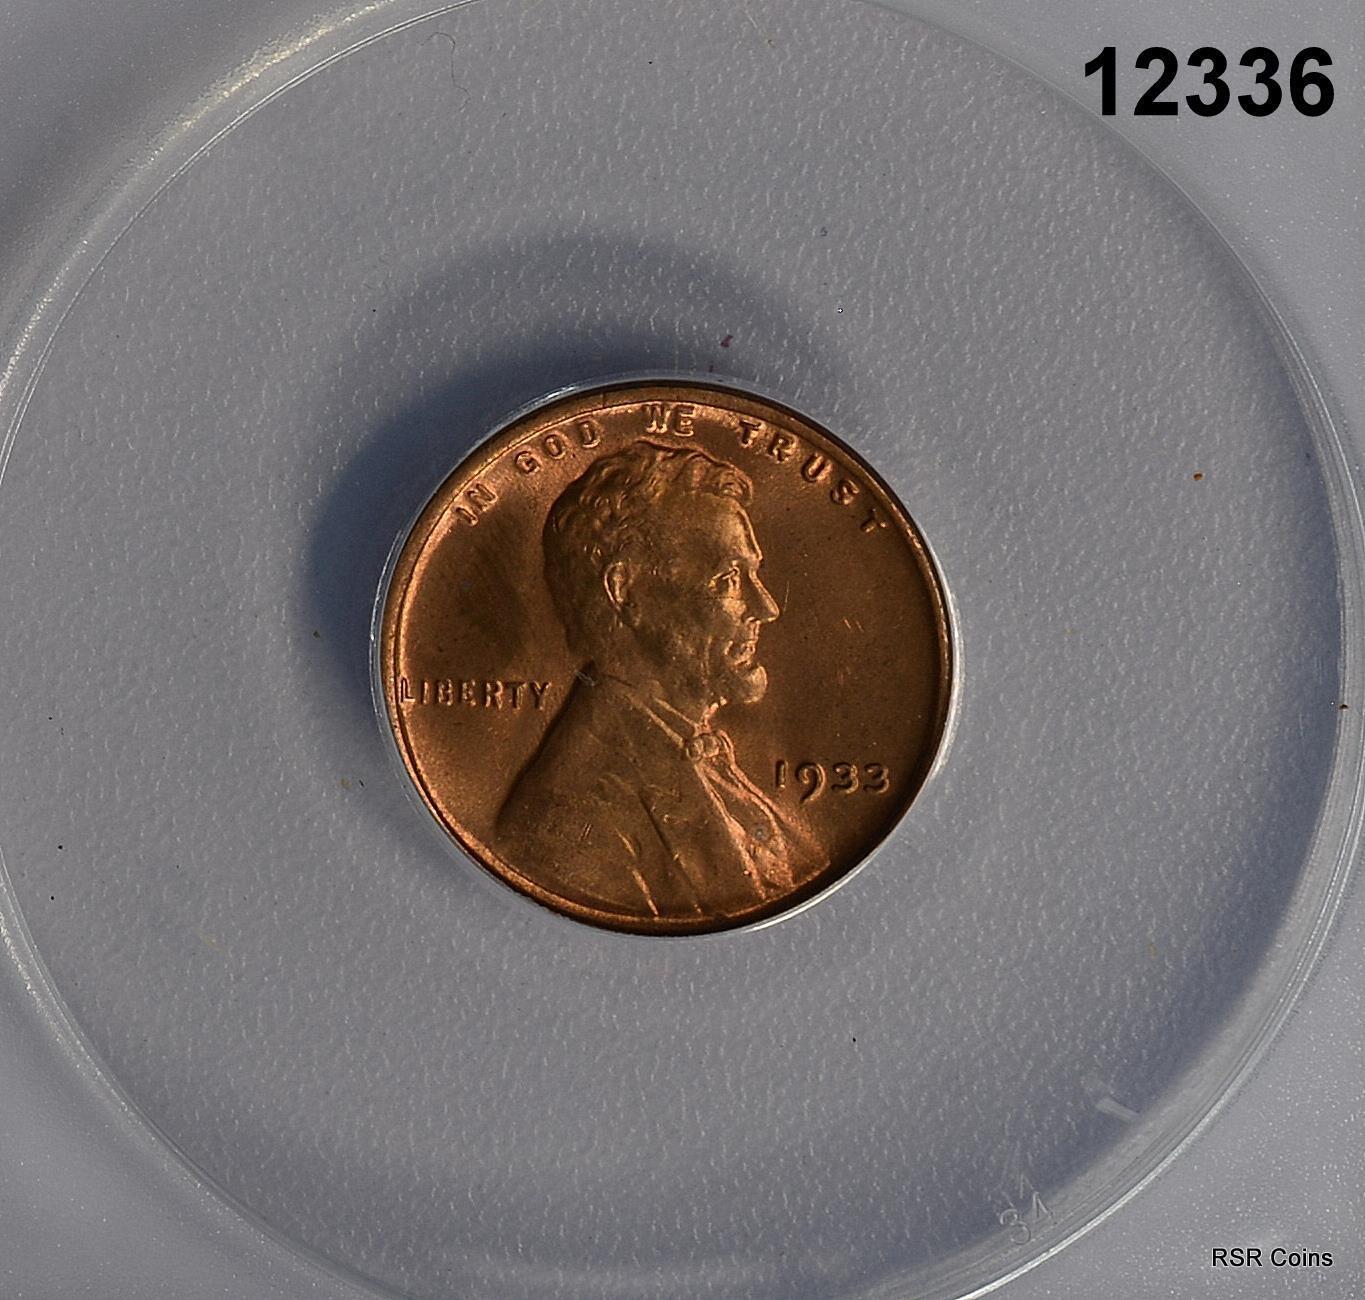 1933 LINCOLN CENT ANACS CERTIFIED MS65 RB WOW!! #12336